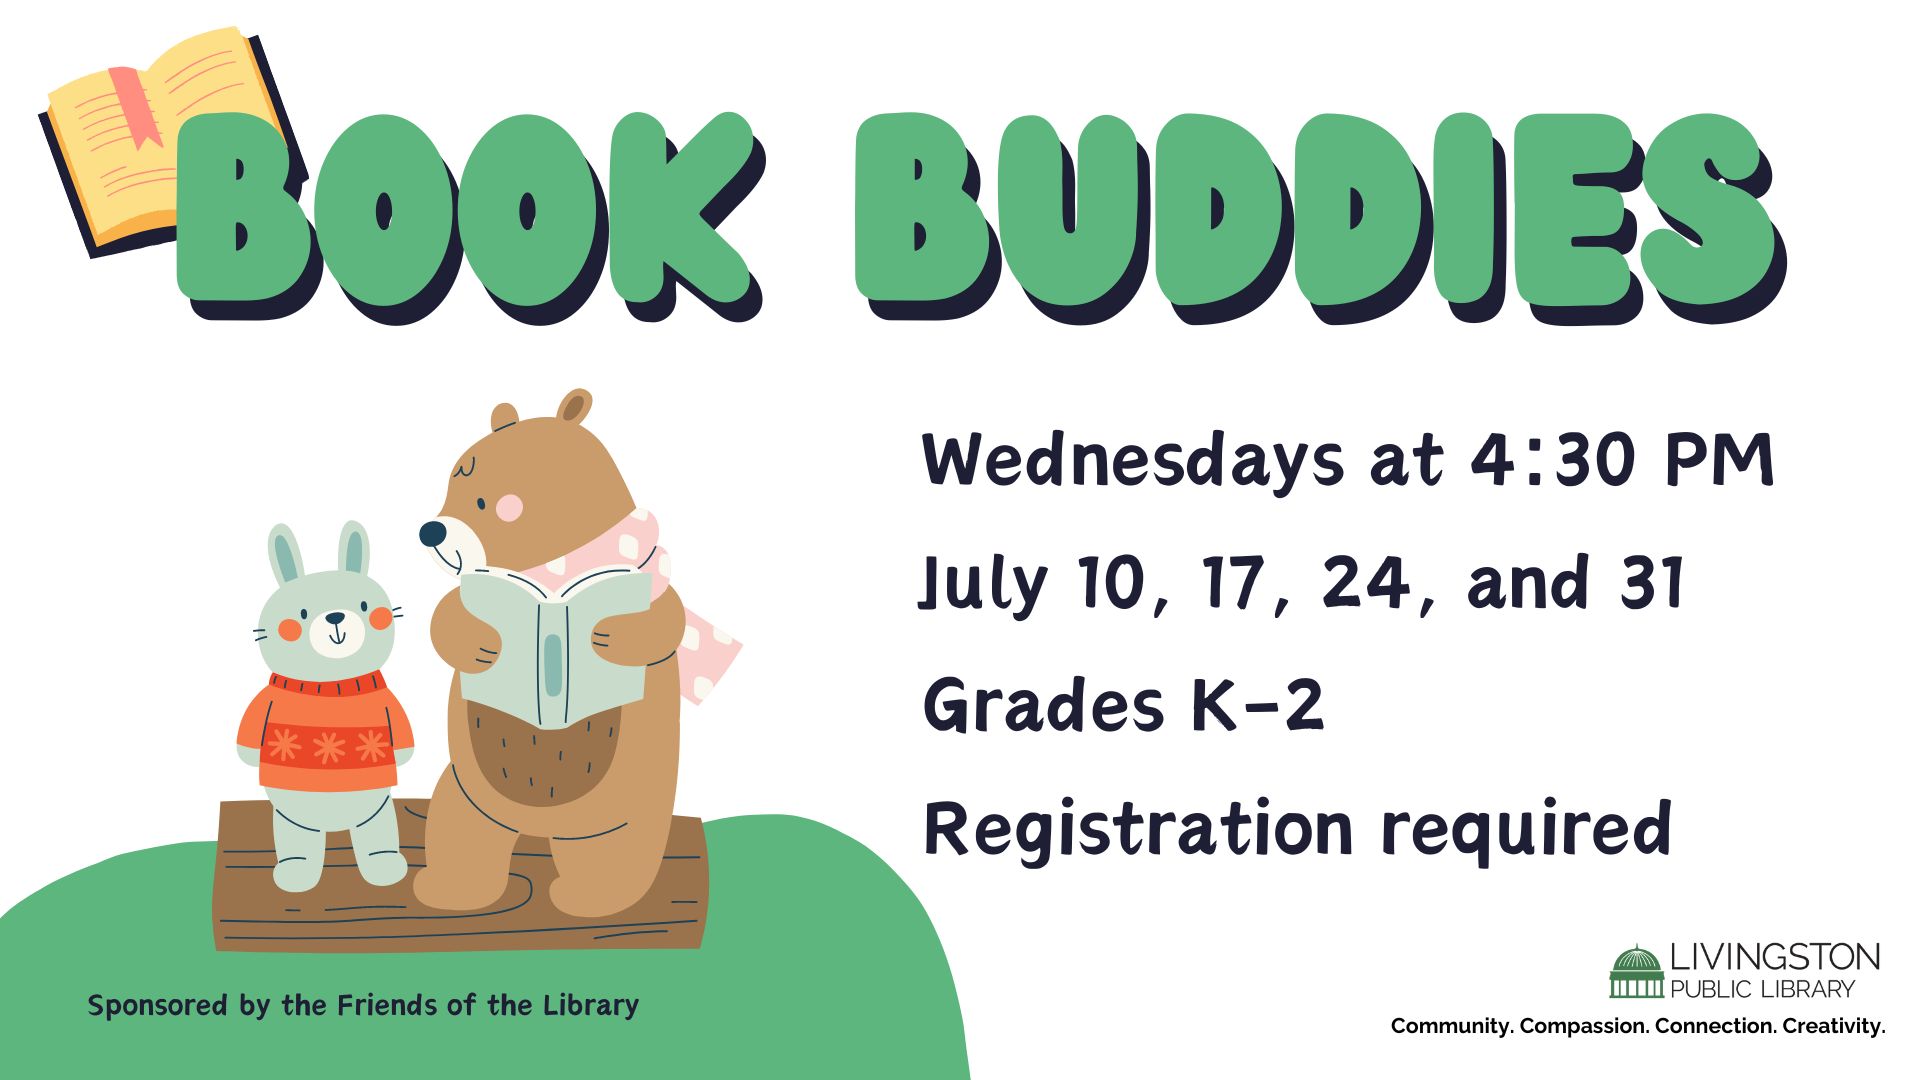 Drawing of a bear reading to a bunny on a log. Book Buddies. Wednesdays at 4:30 PM. July 10, 17, 24, and 31. Grades K-2. Registration required.